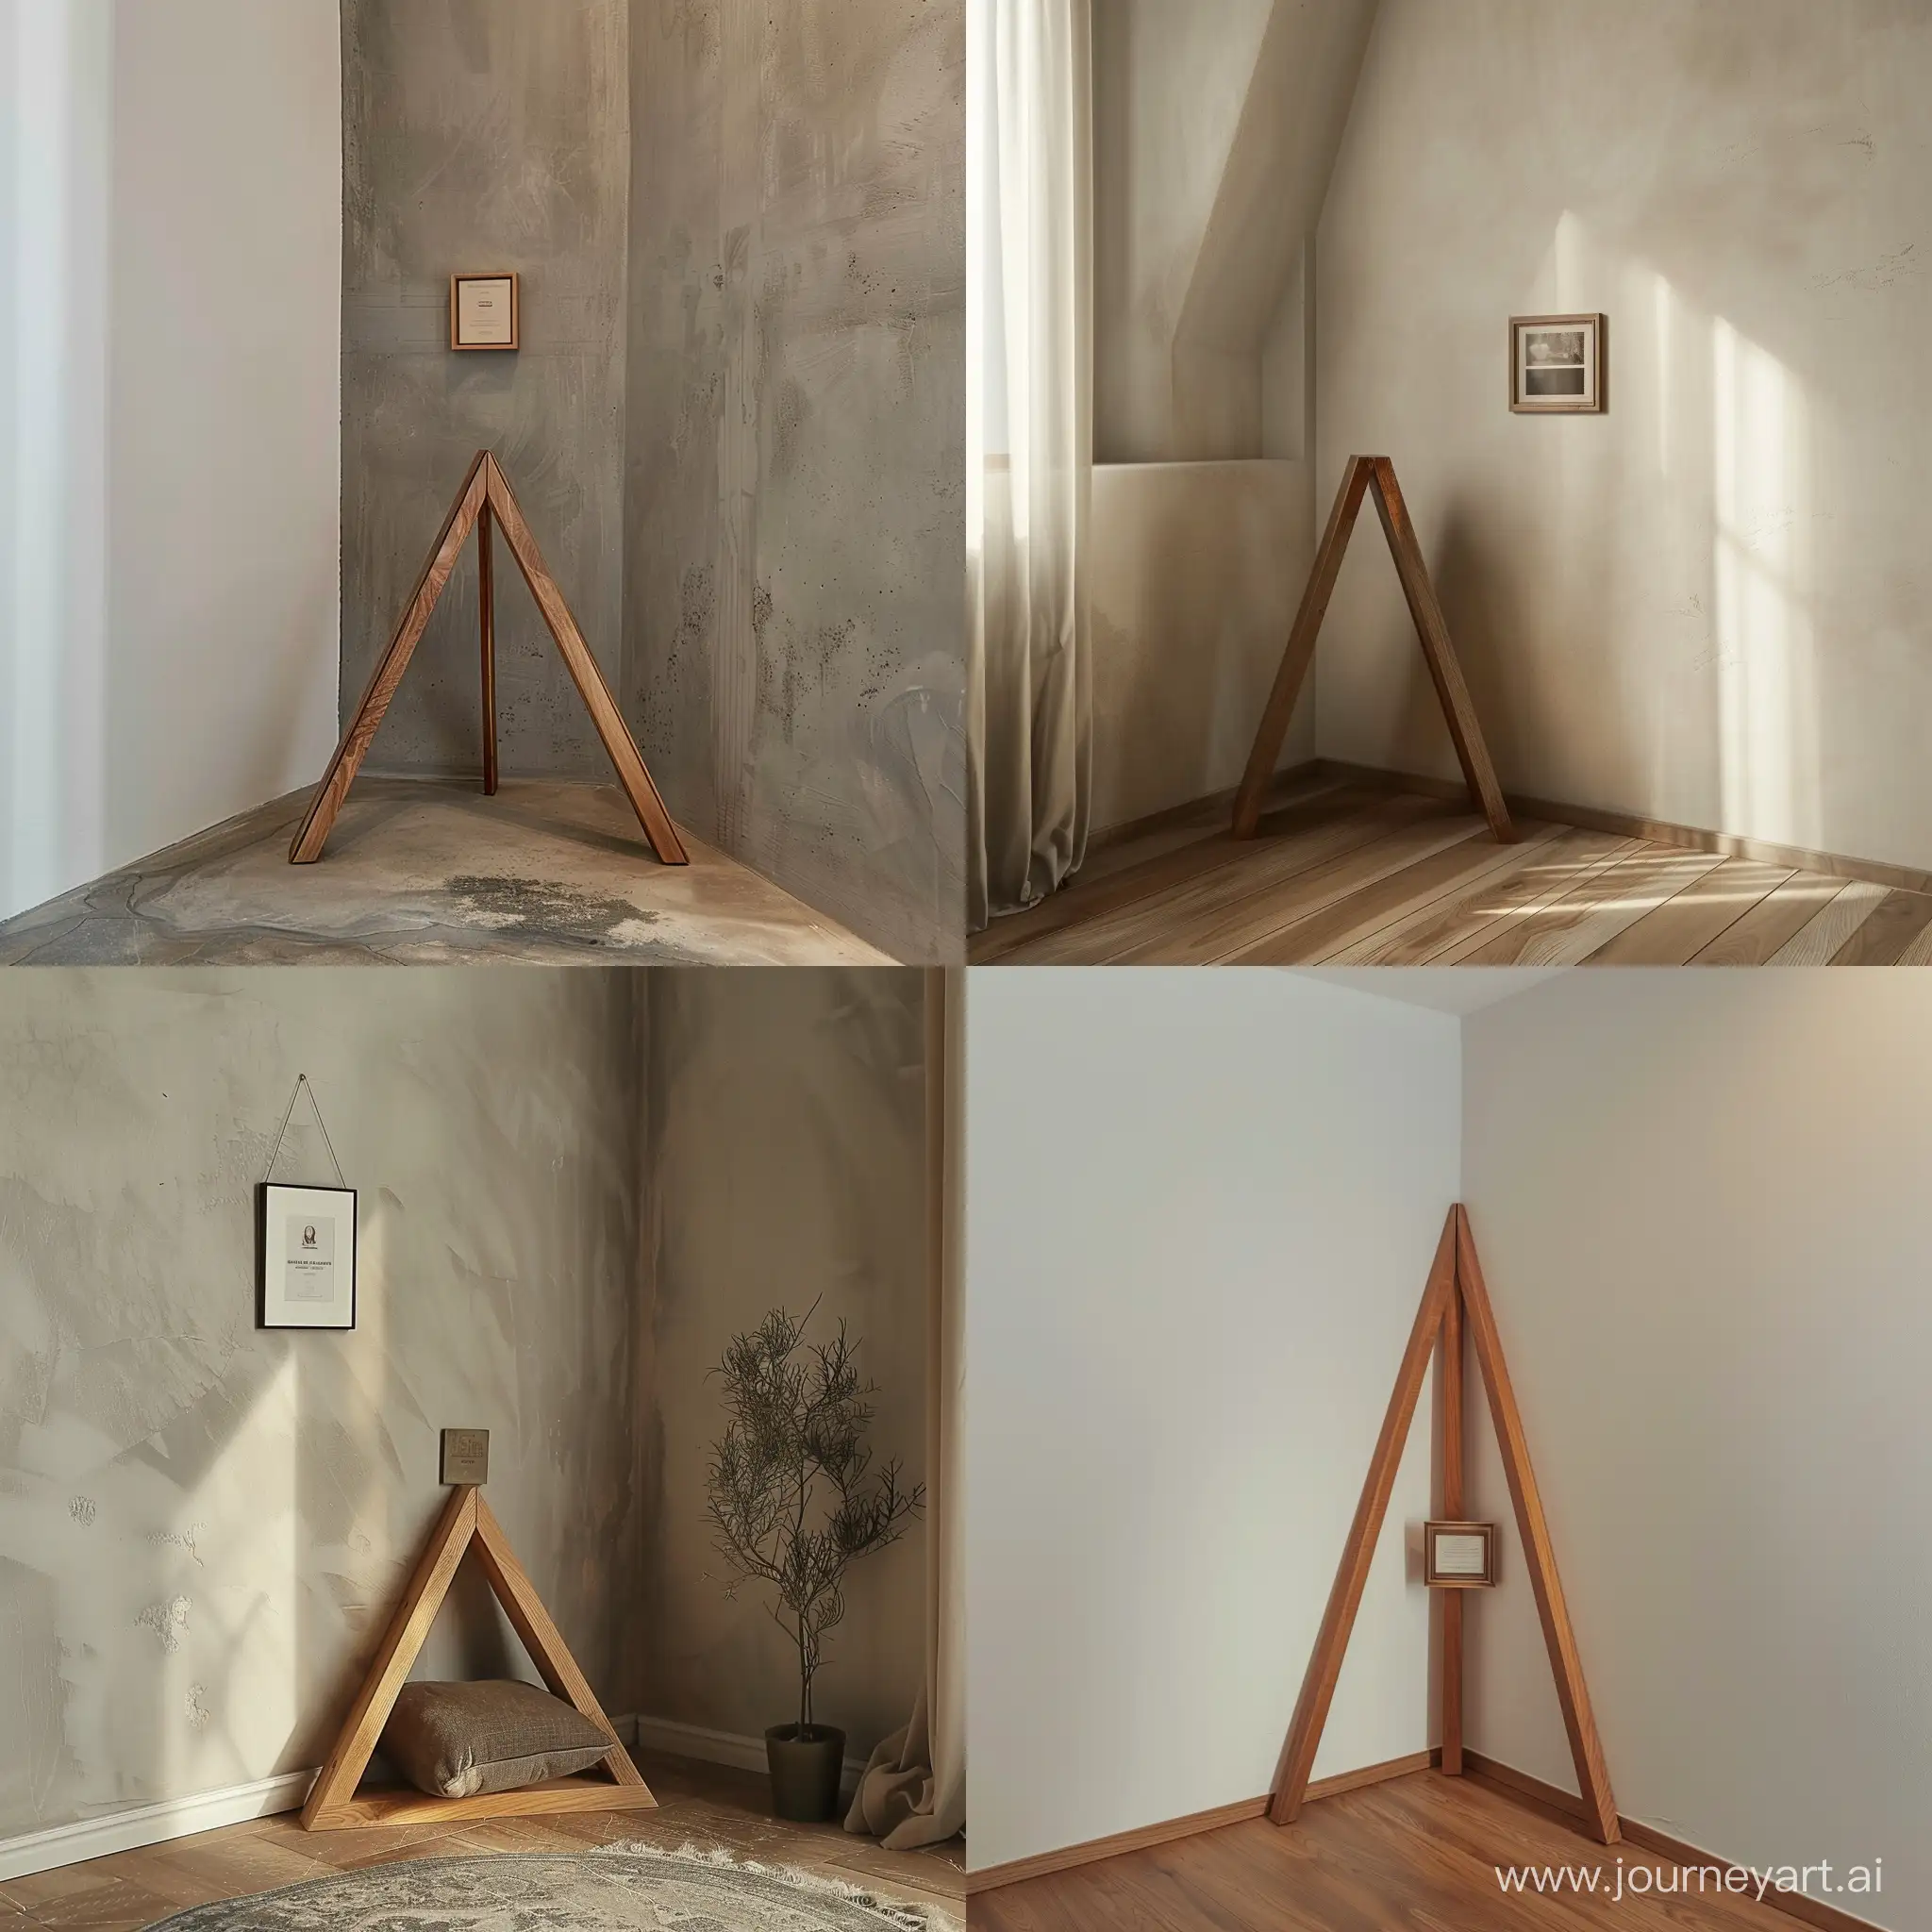 Create an image where there is a triangular wooden stand placed in a corner of the room where two the walls meet, and on the stand place a photograph or a plaque